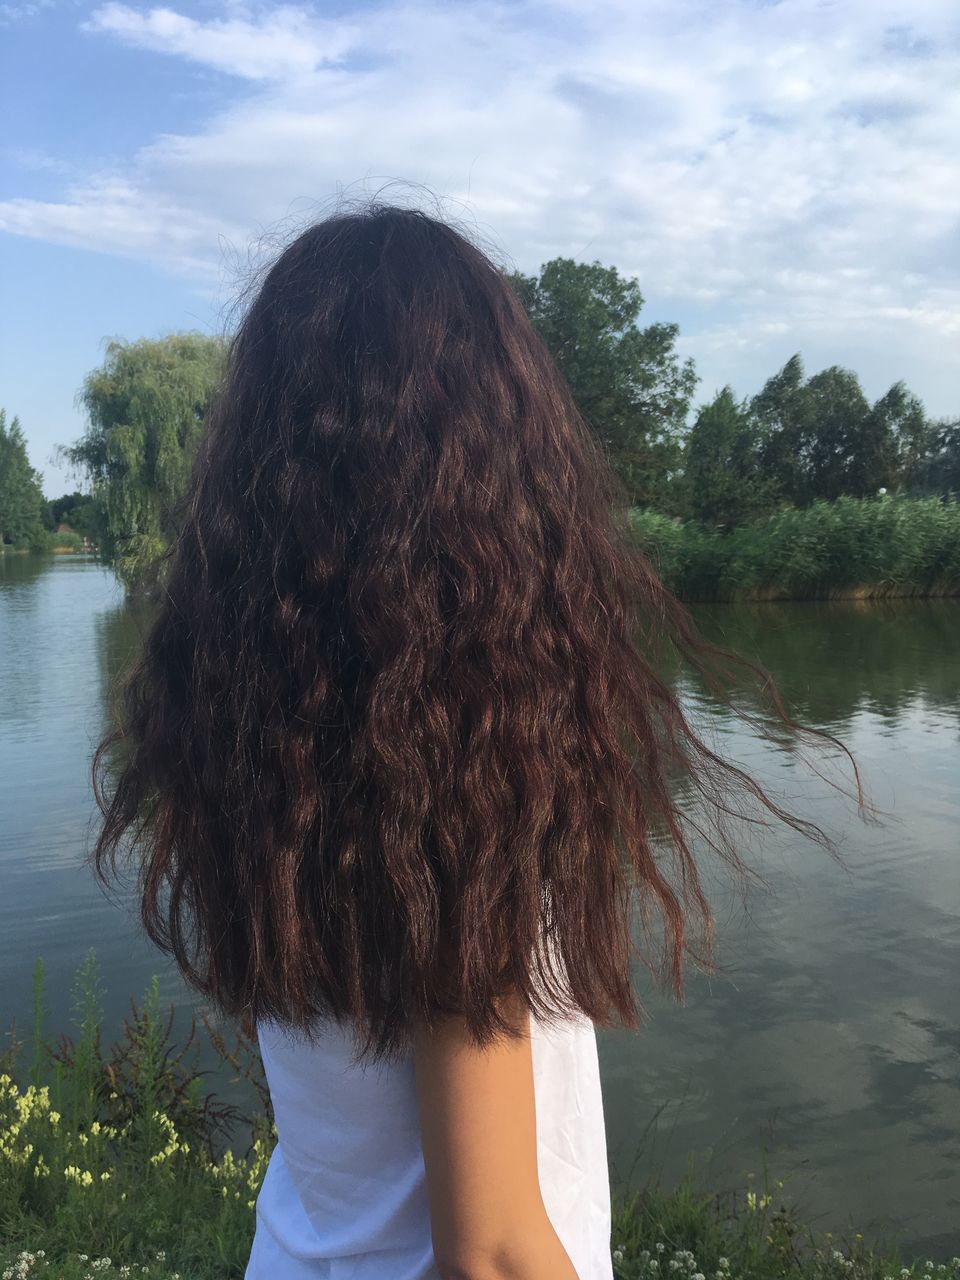 water, real people, one person, rear view, tree, leisure activity, lake, outdoors, day, sky, nature, standing, long hair, casual clothing, lifestyles, women, cloud - sky, young women, beauty in nature, young adult